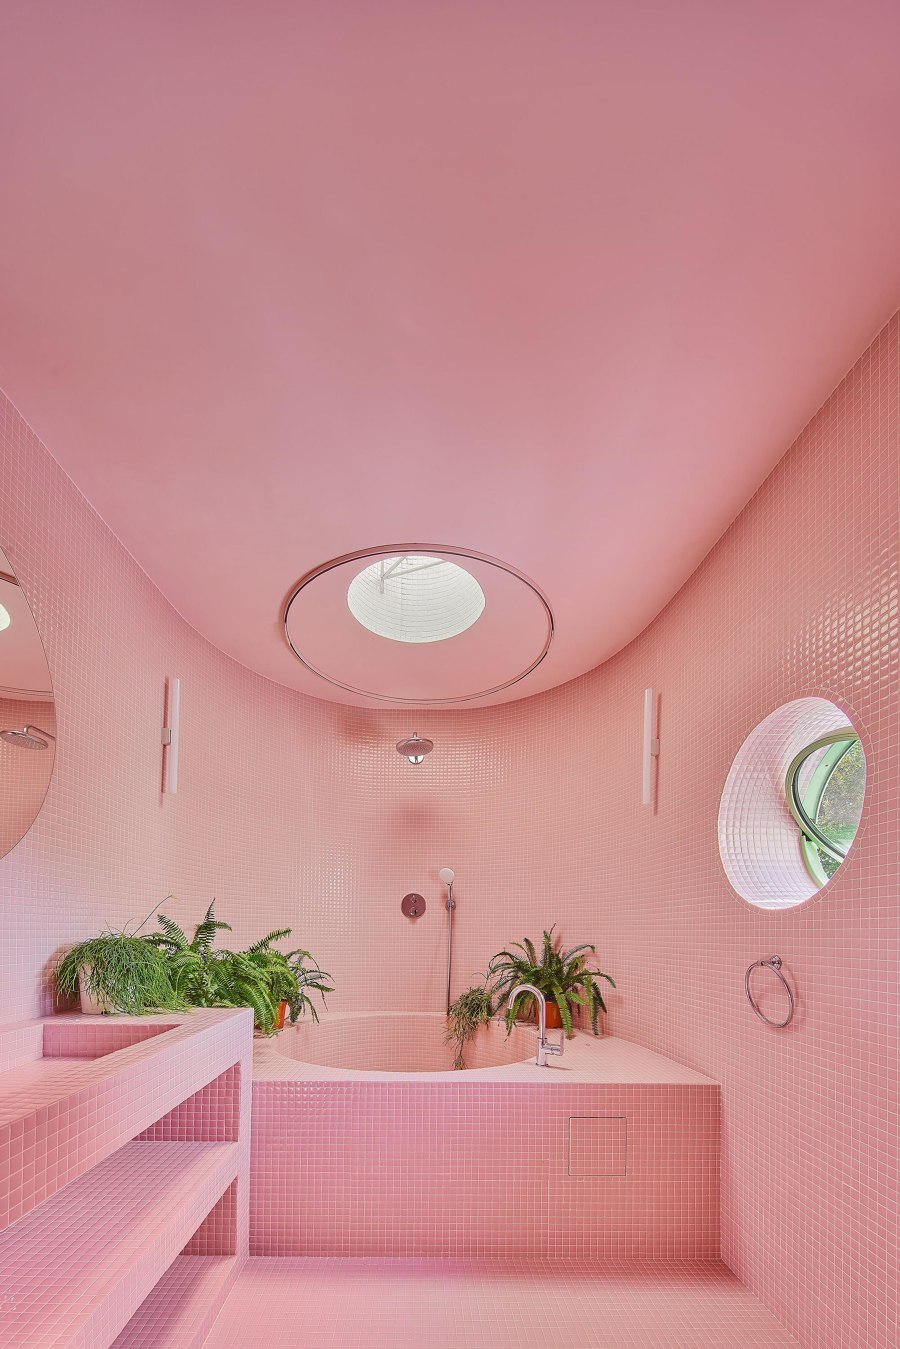 Playful bathrooms from around the world that break the mould | Novità